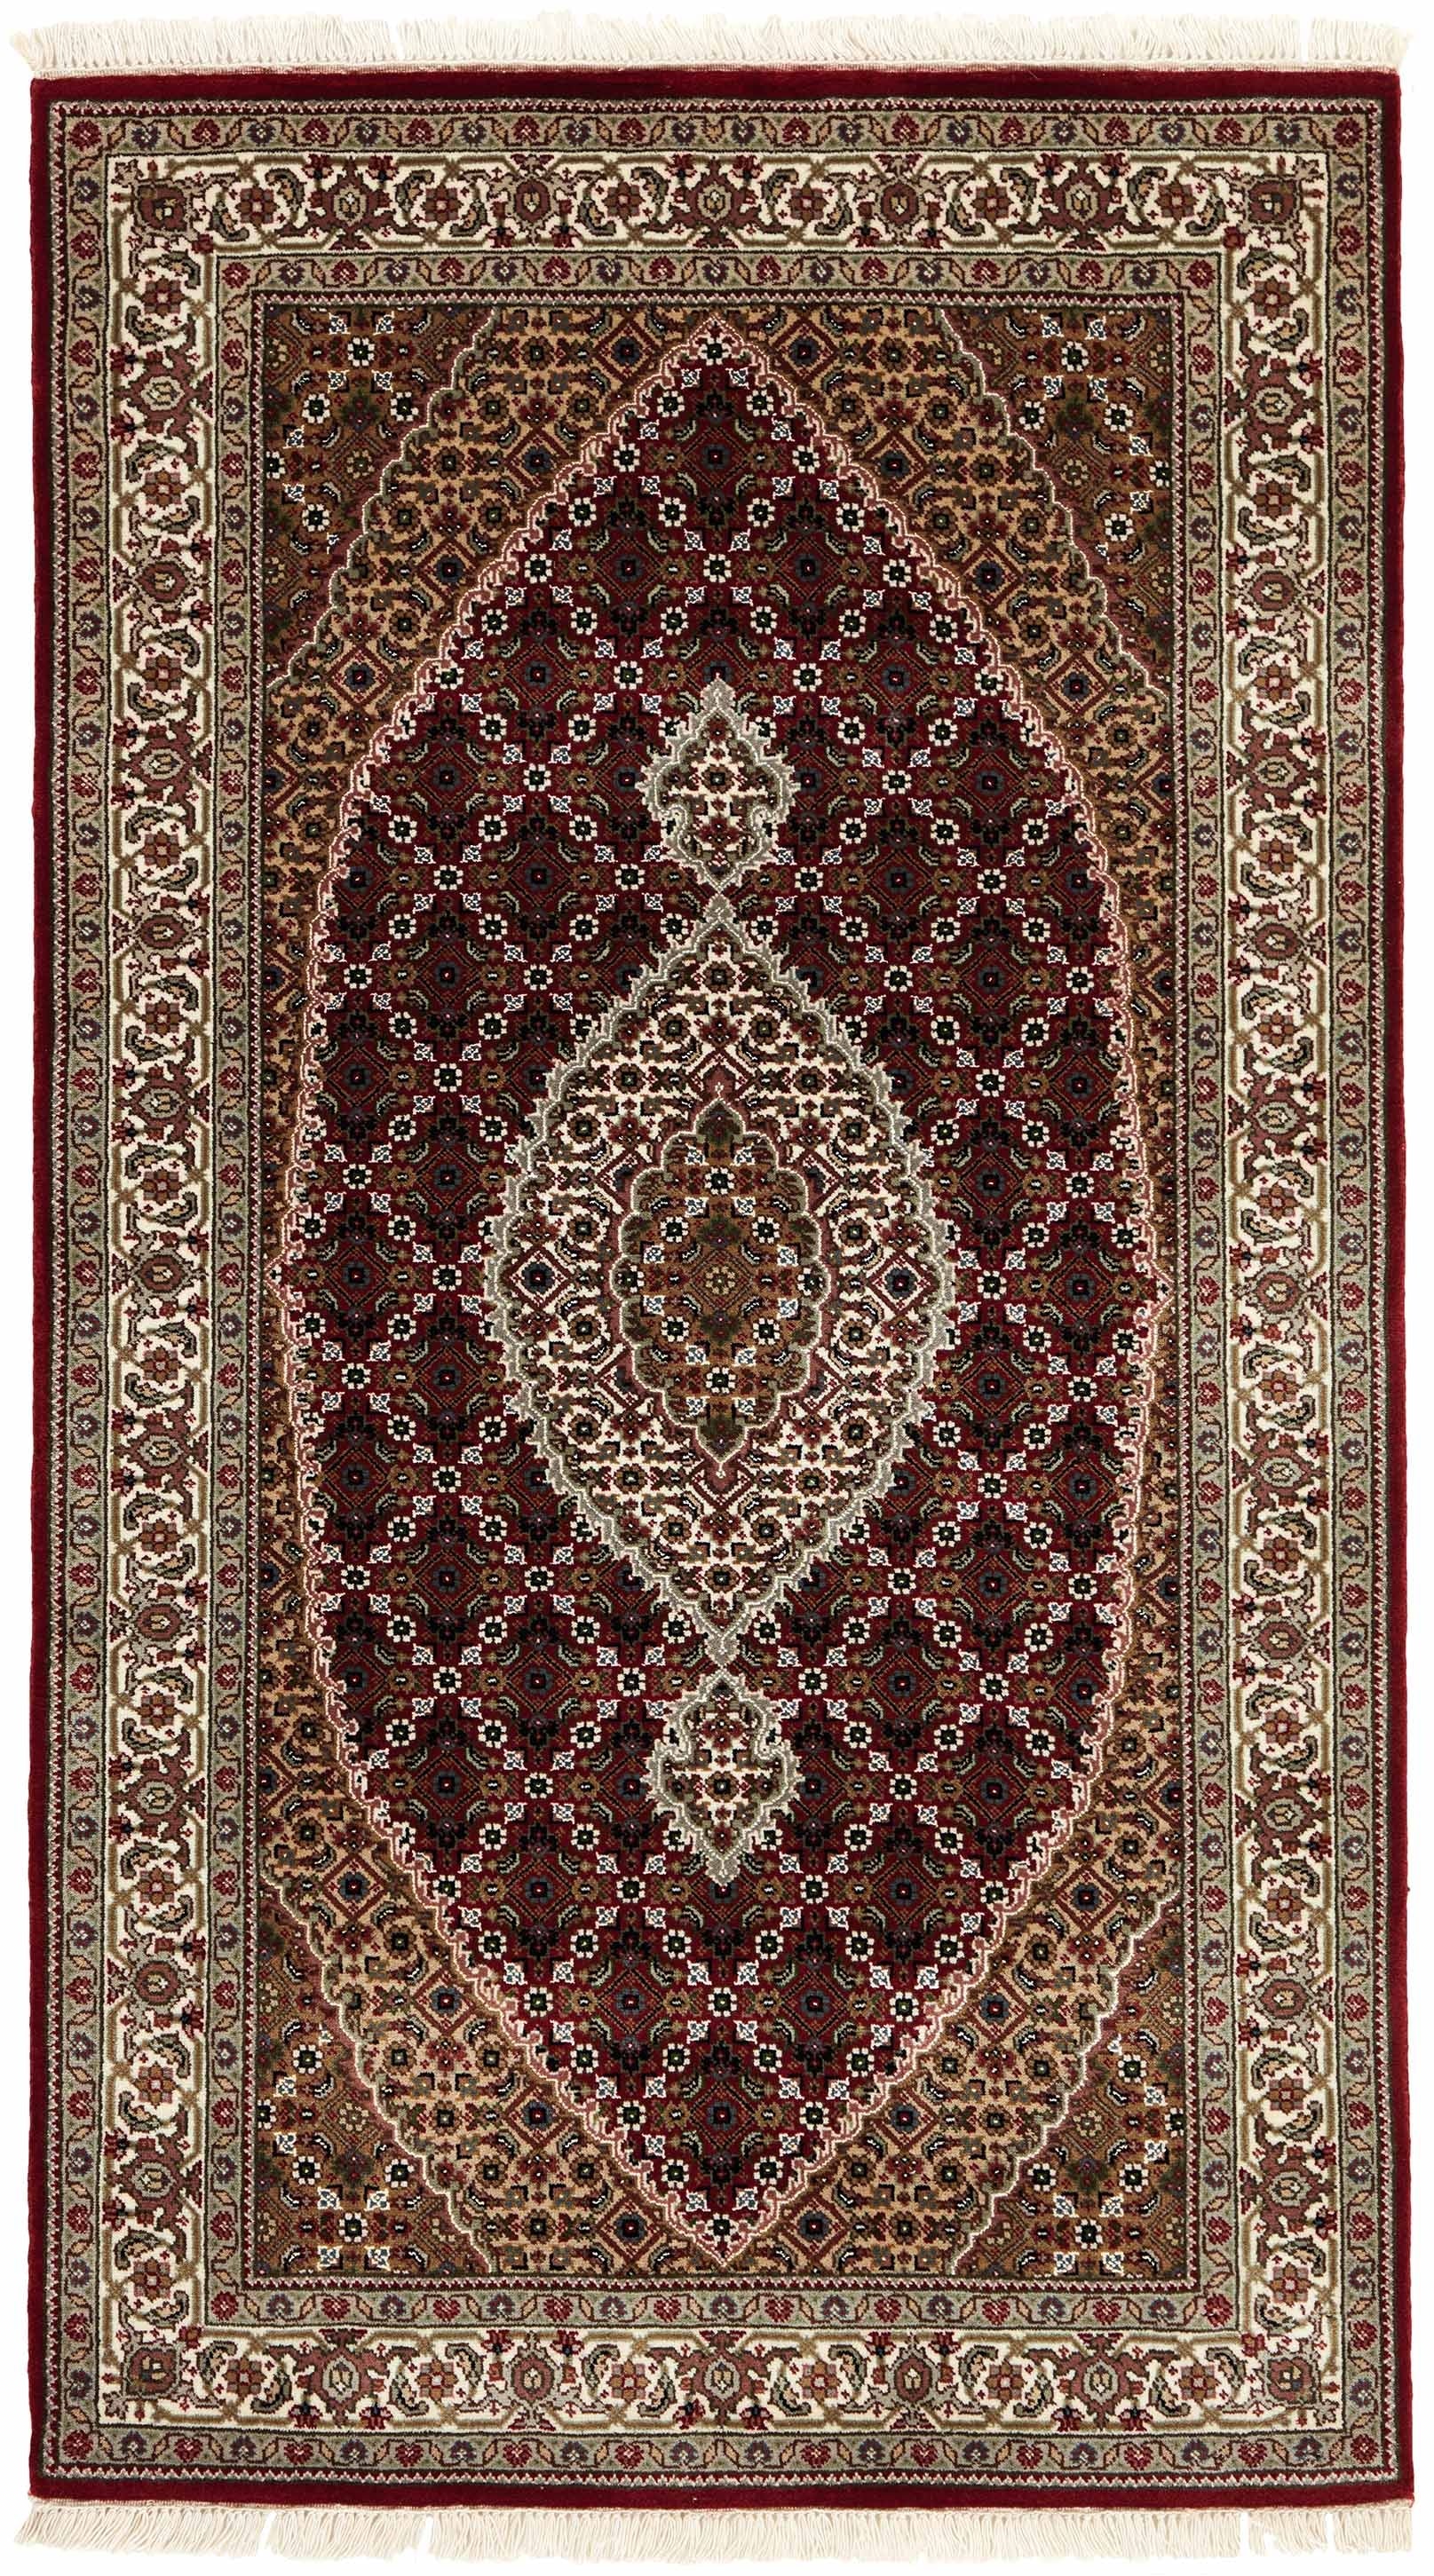 Authentic Oriental rug with traditional geometric and floral design in red, black and beige.